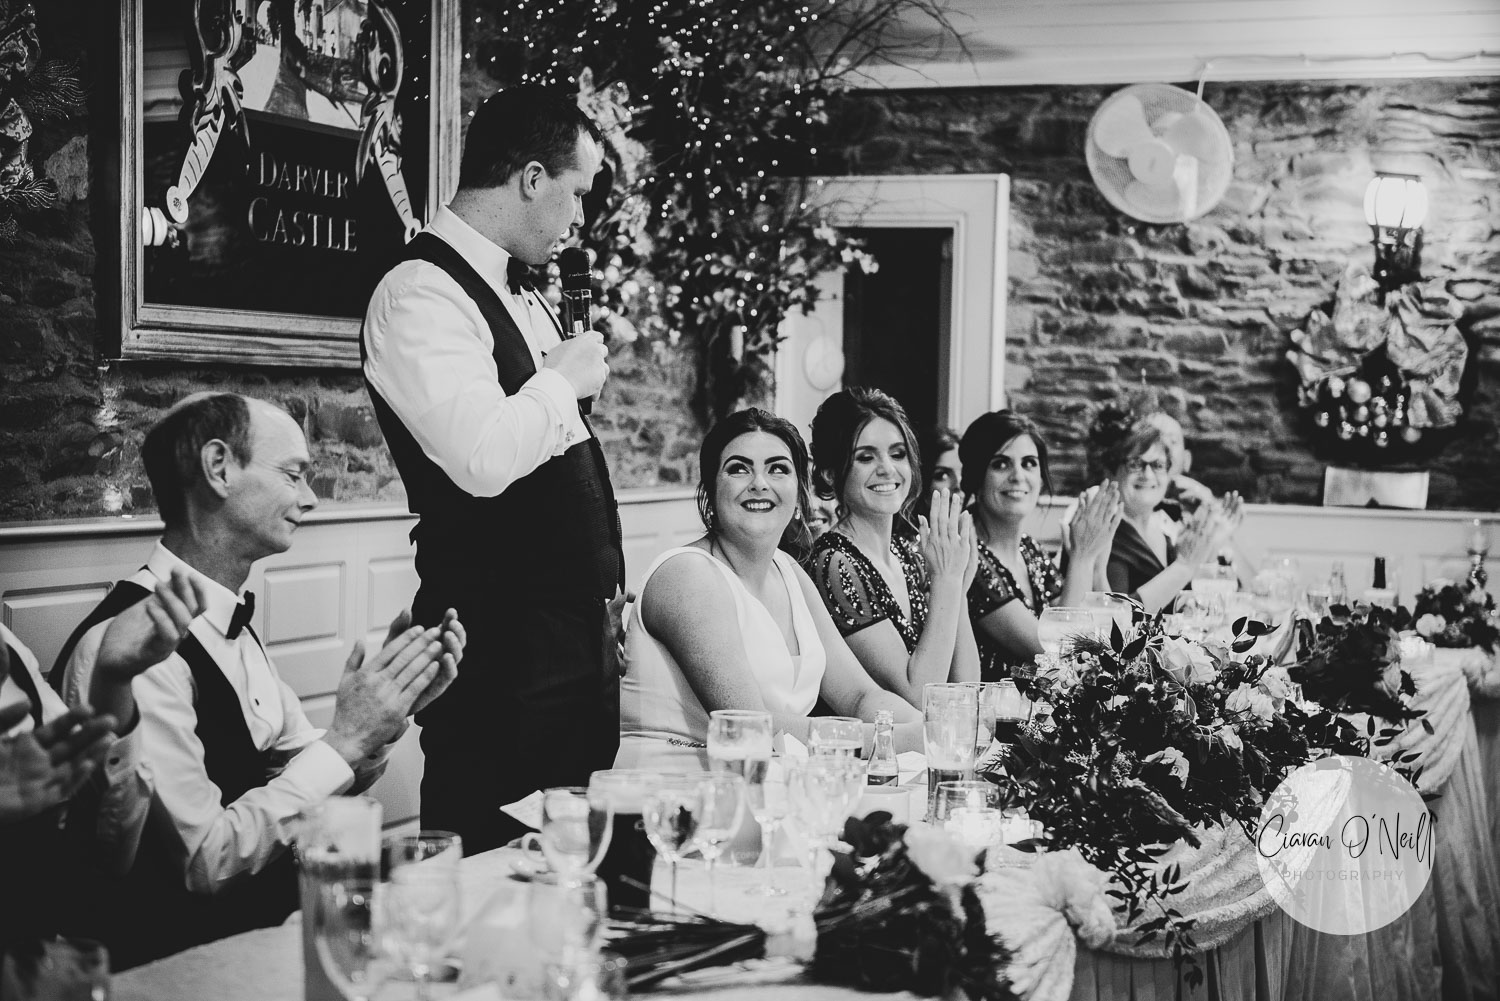 The groom looking at his new wife while making his speech